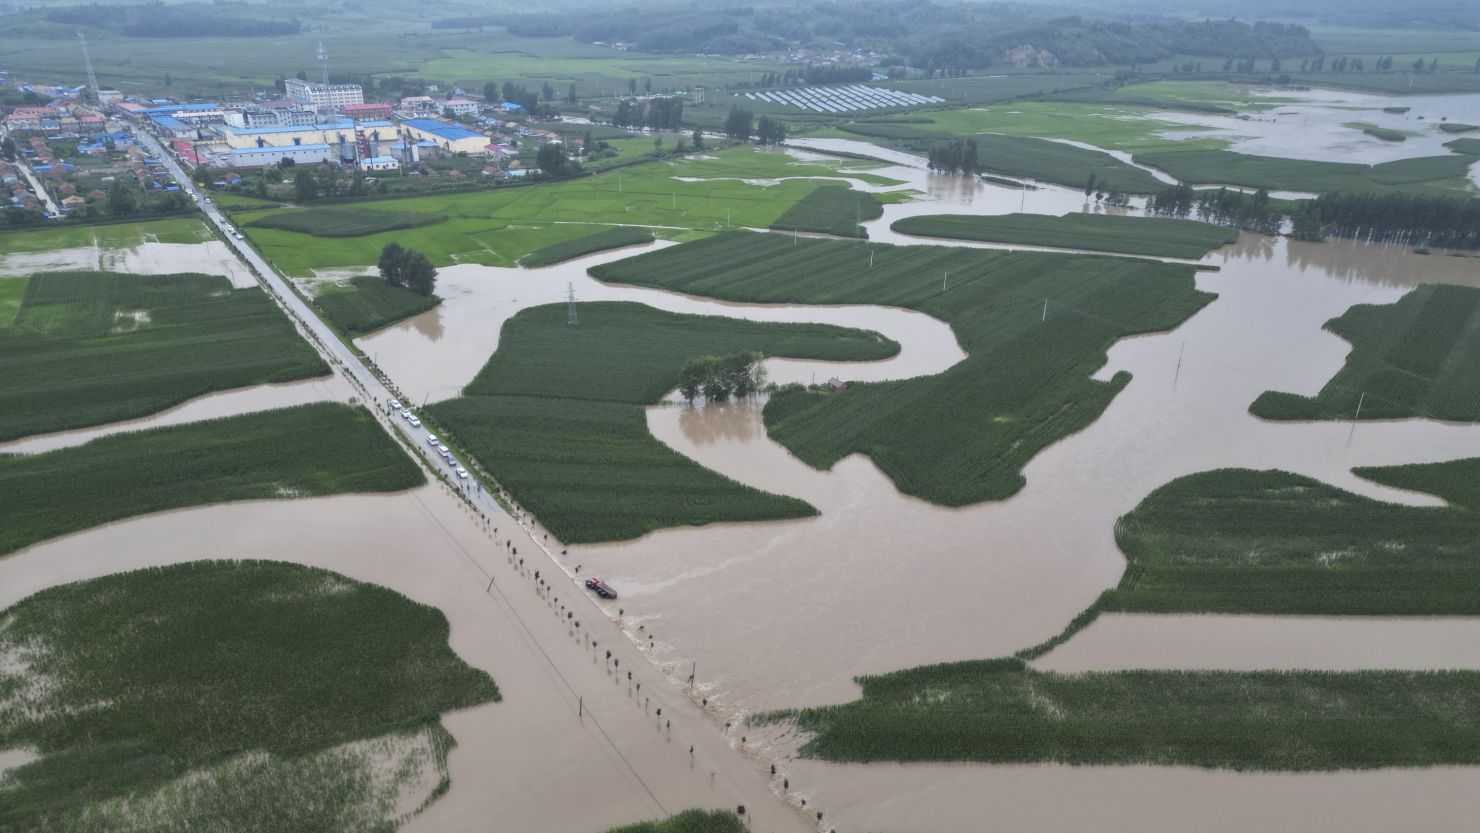 Fields and roads in the city of Shulan in northeastern China's Jilin province are submerged by floodwater on August 4.